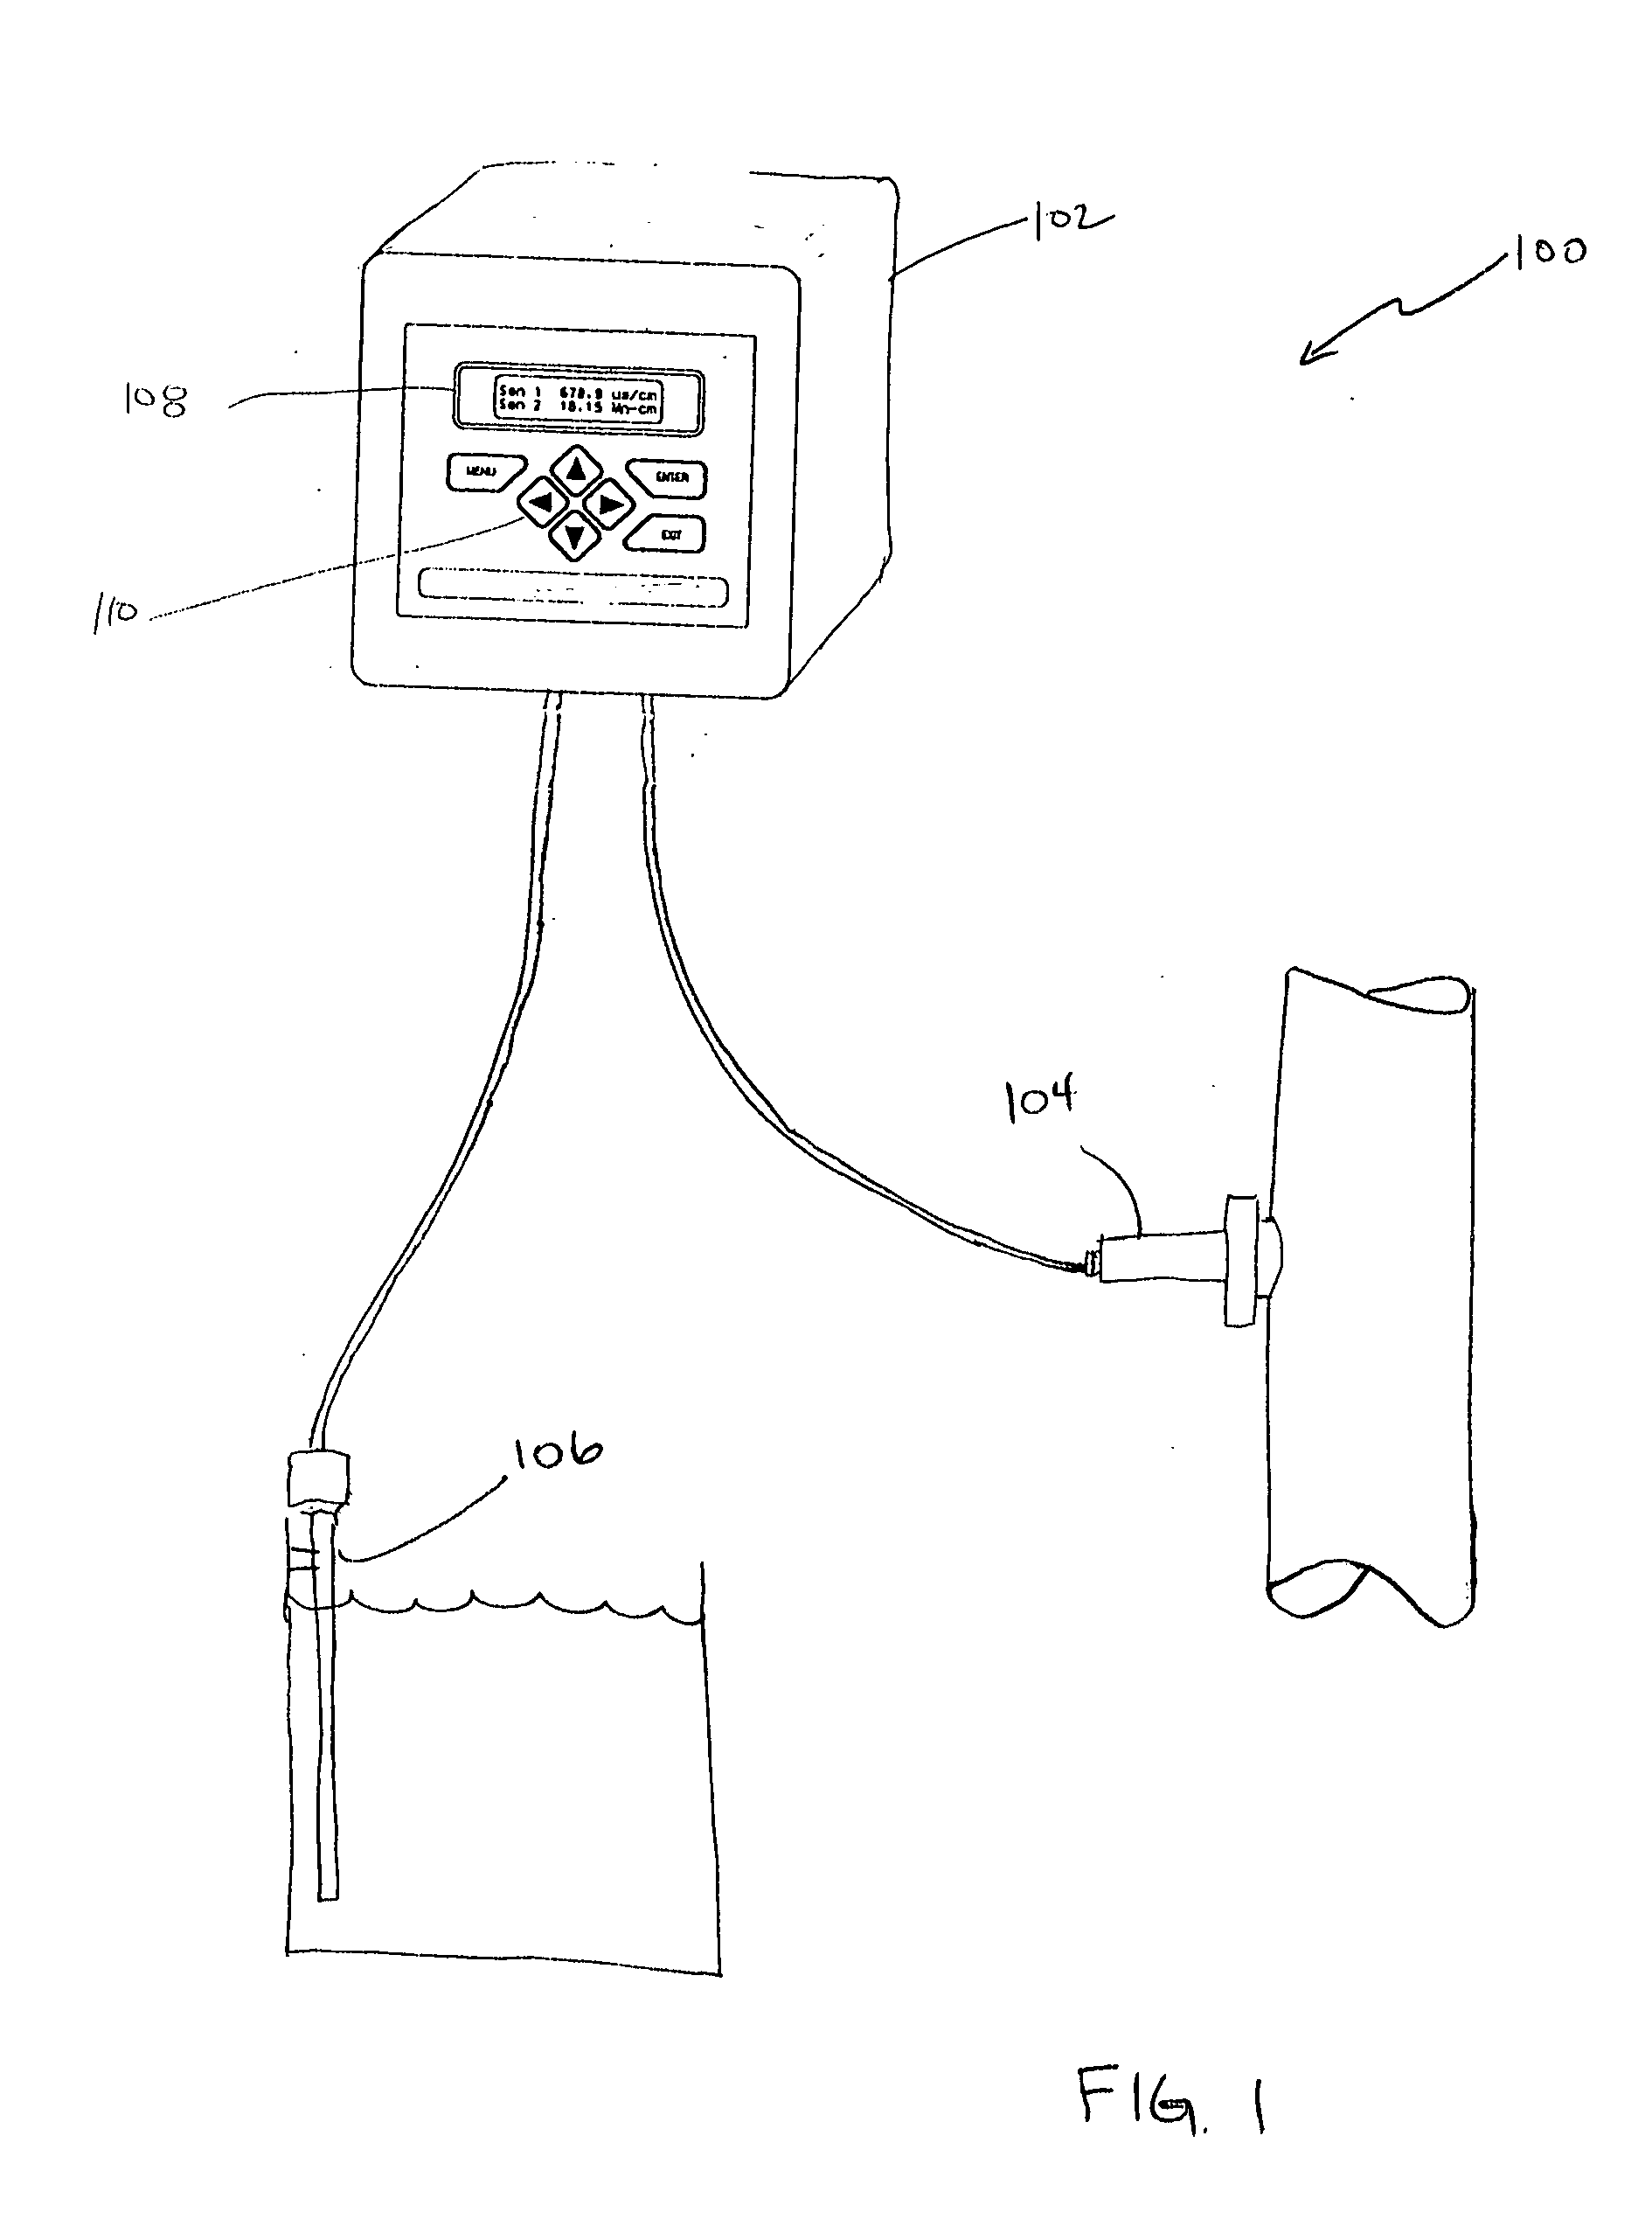 Turbidity sensing system with reduced temperature effects